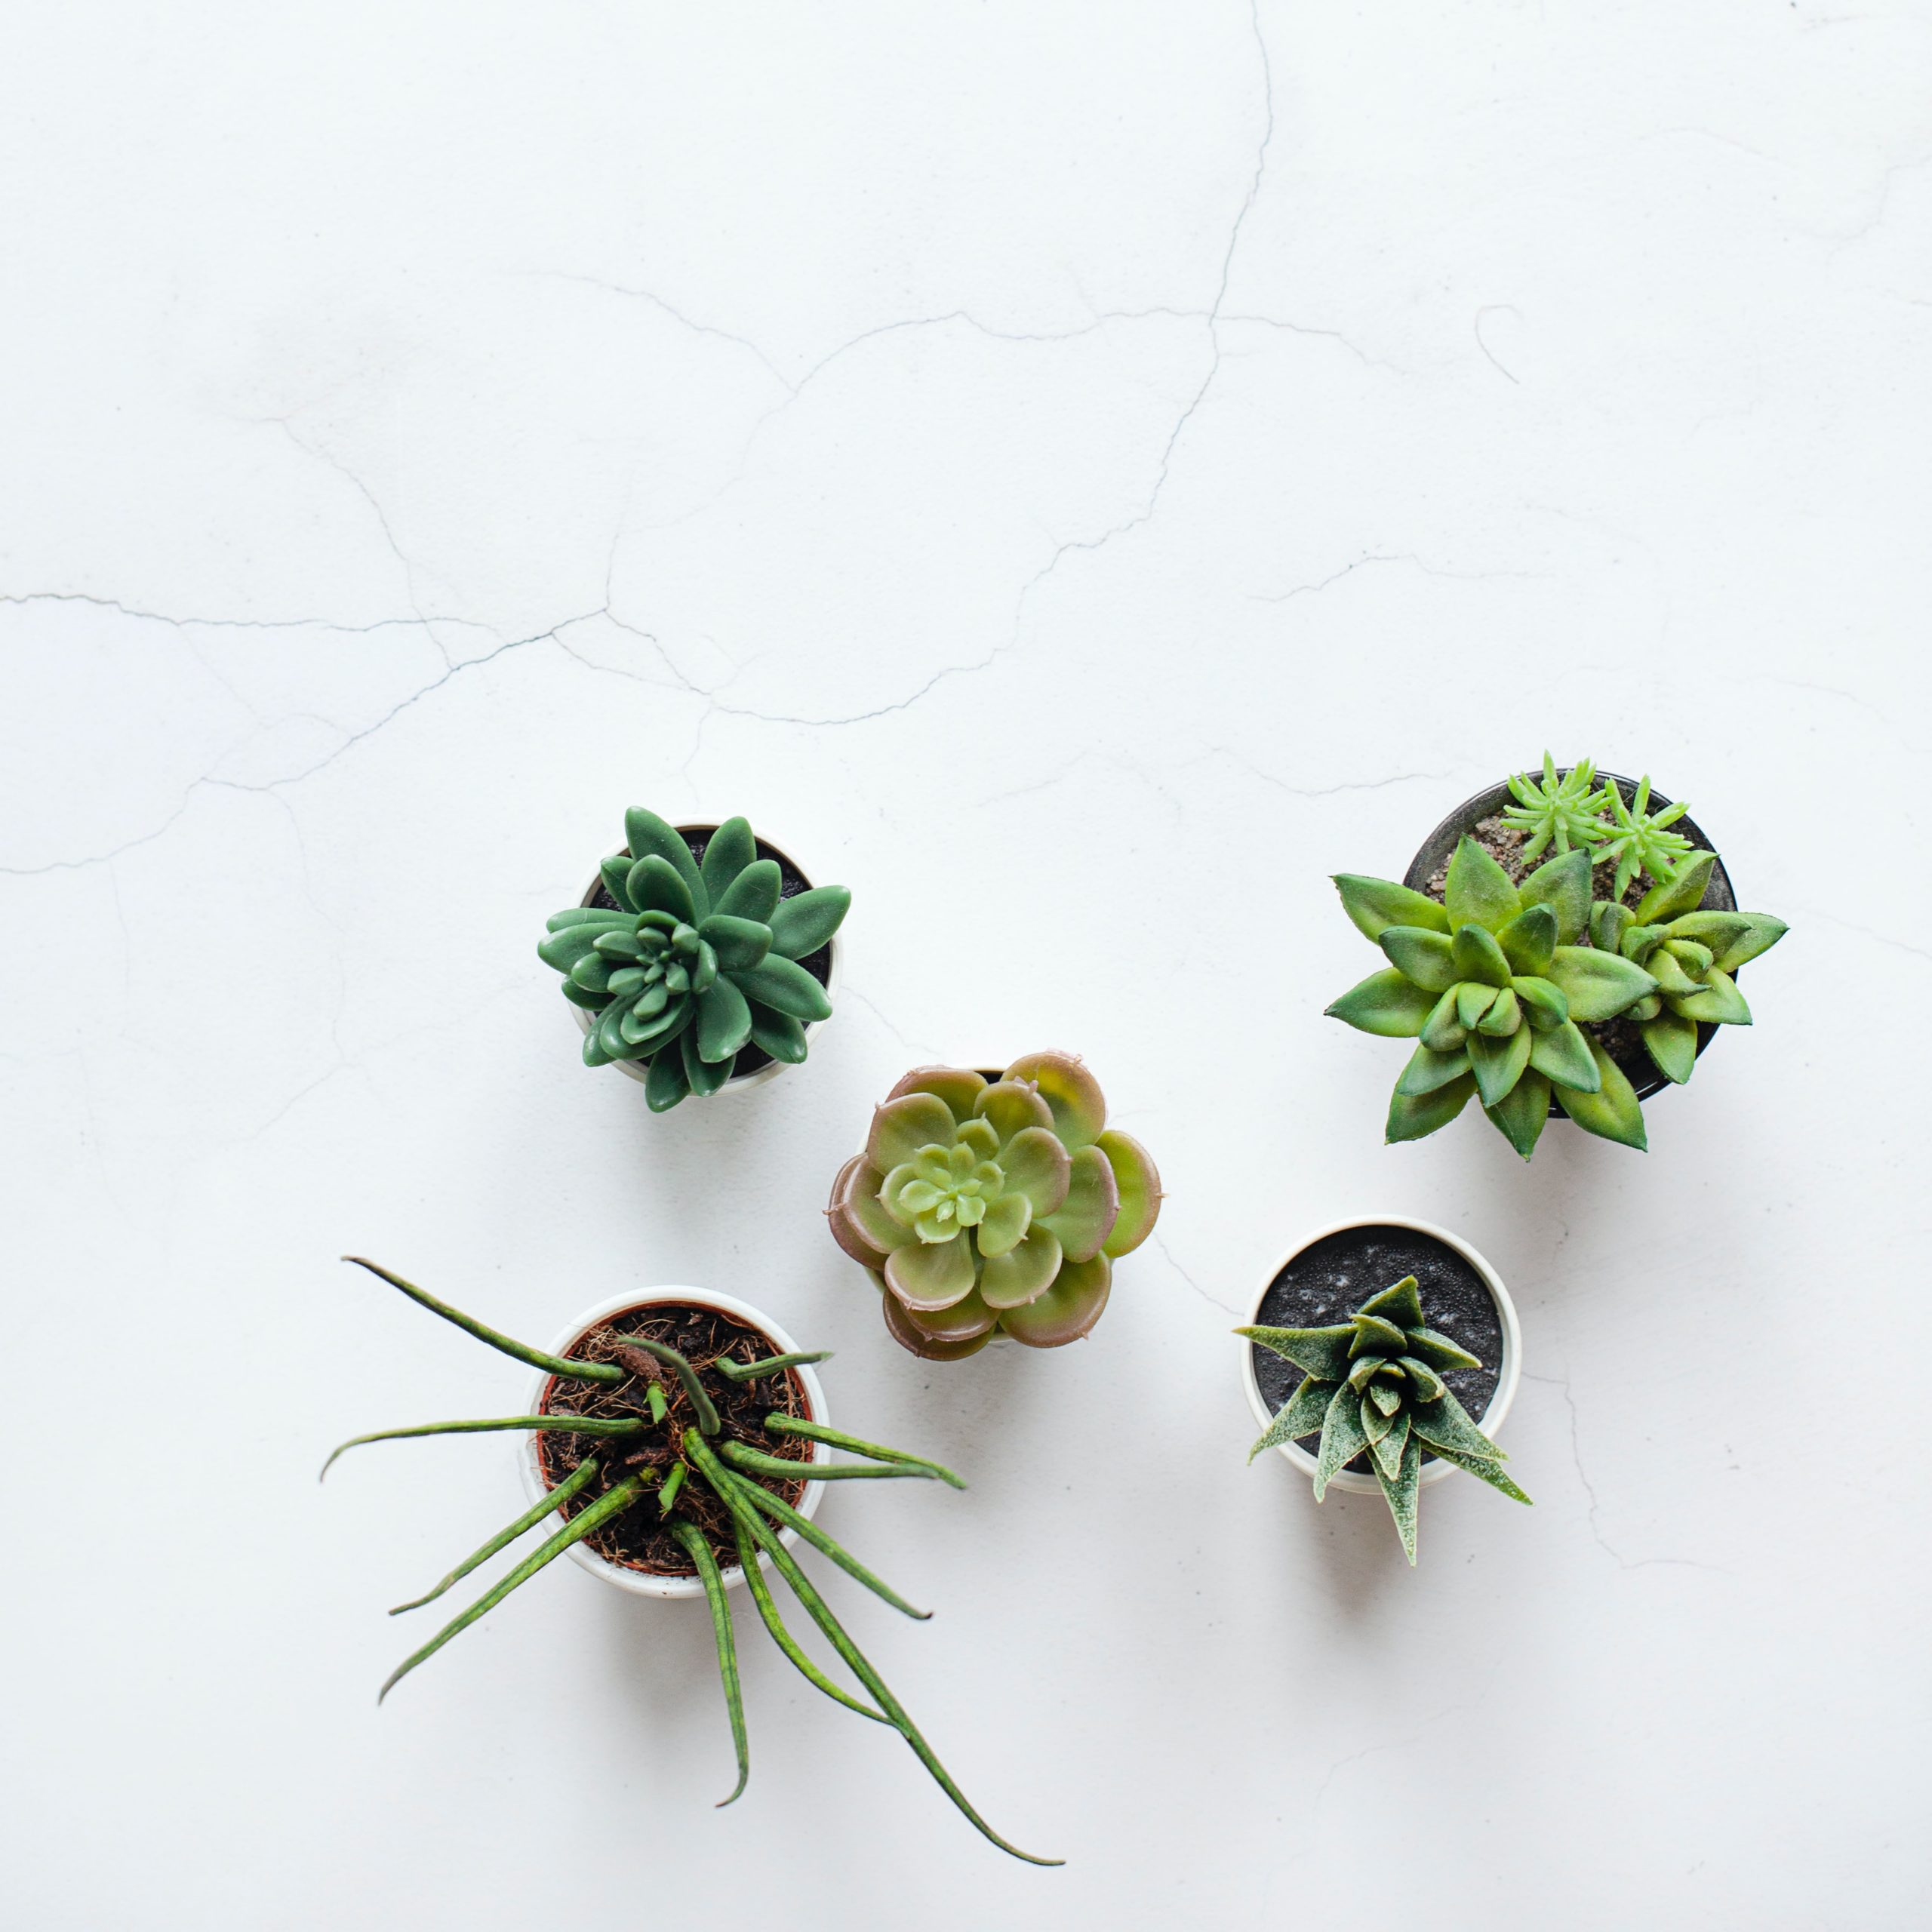 21 Unique Planters to Enhance Any Home